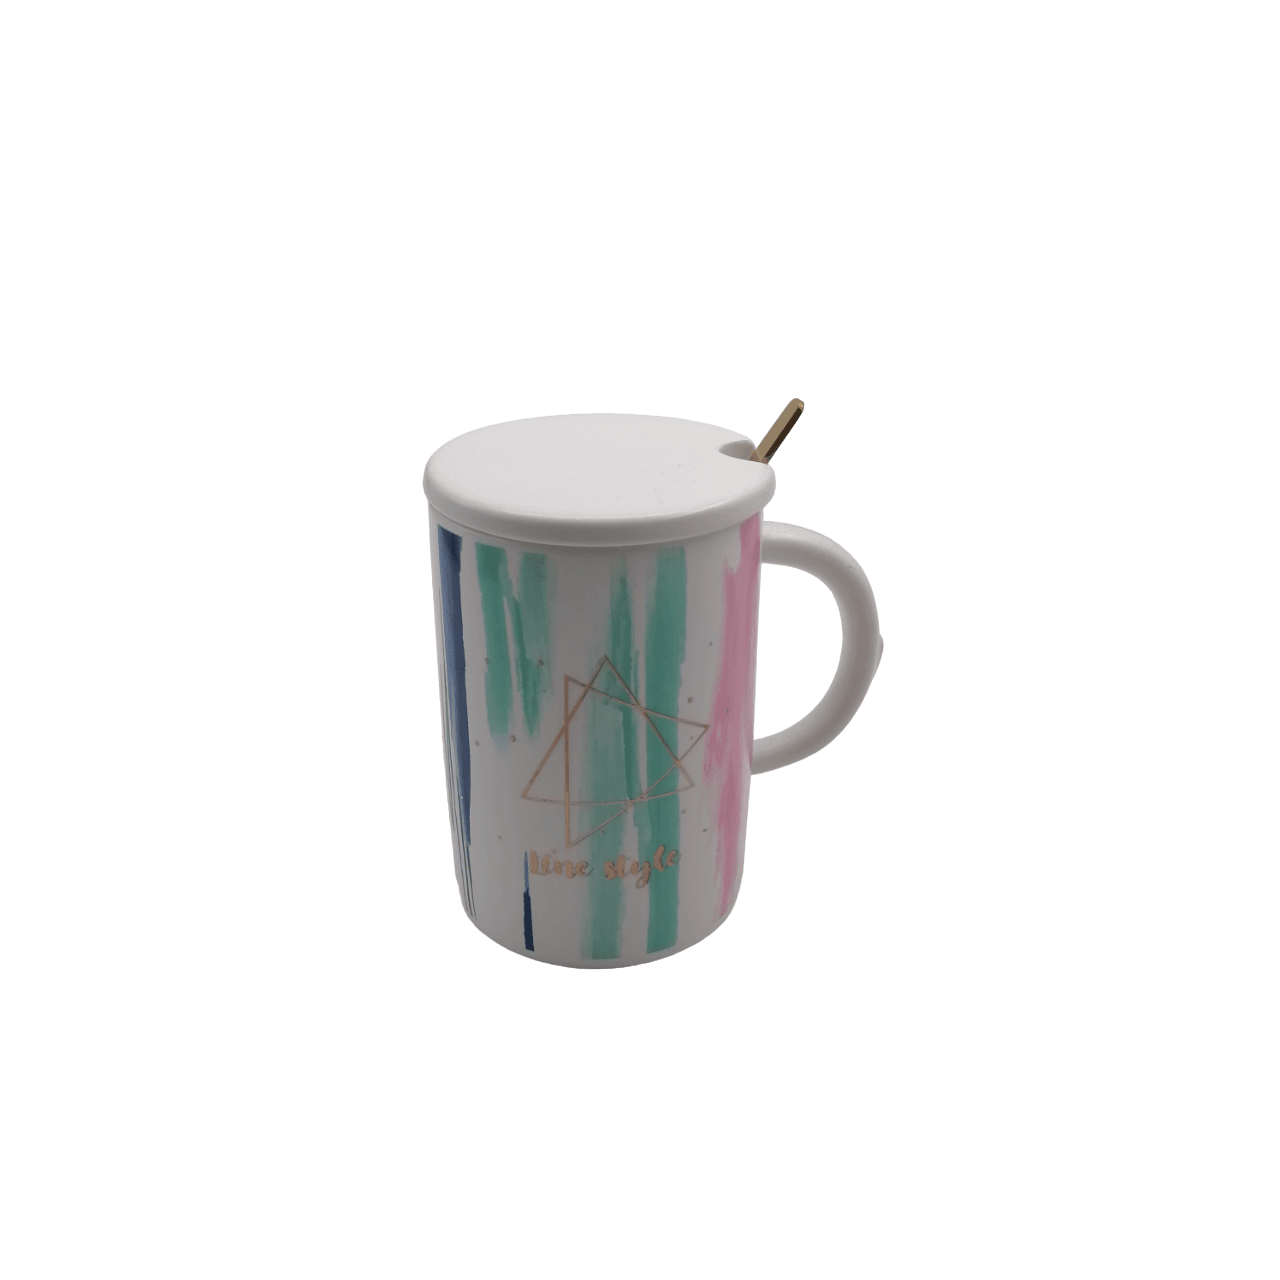 Mug with Ceramic Lid and Spoon - Home And Trends